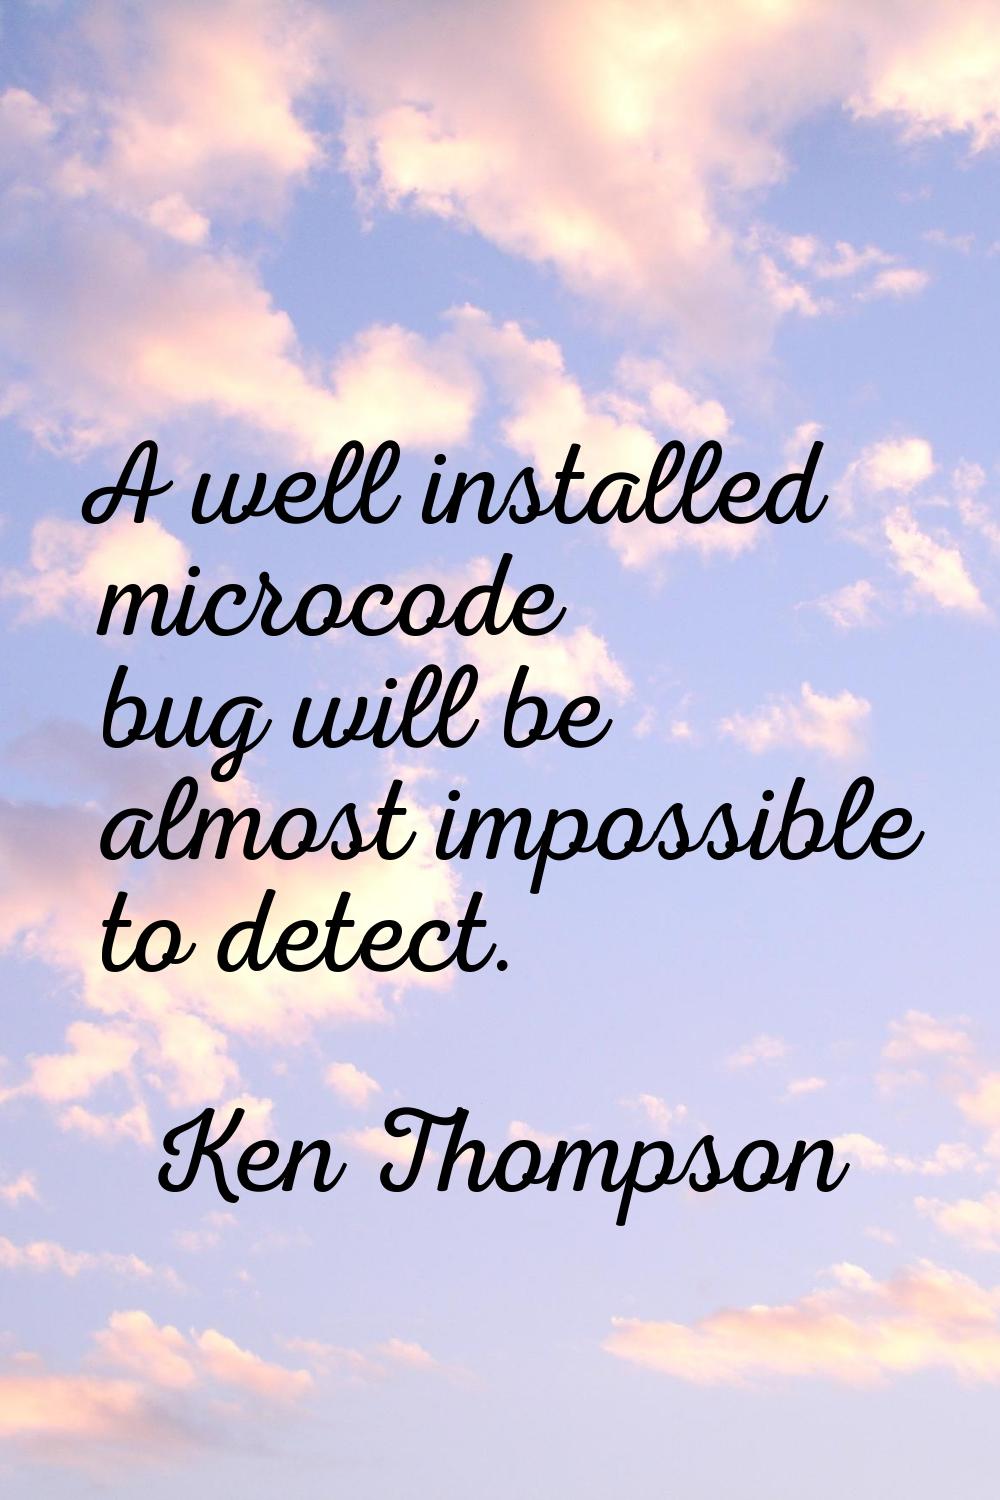 A well installed microcode bug will be almost impossible to detect.